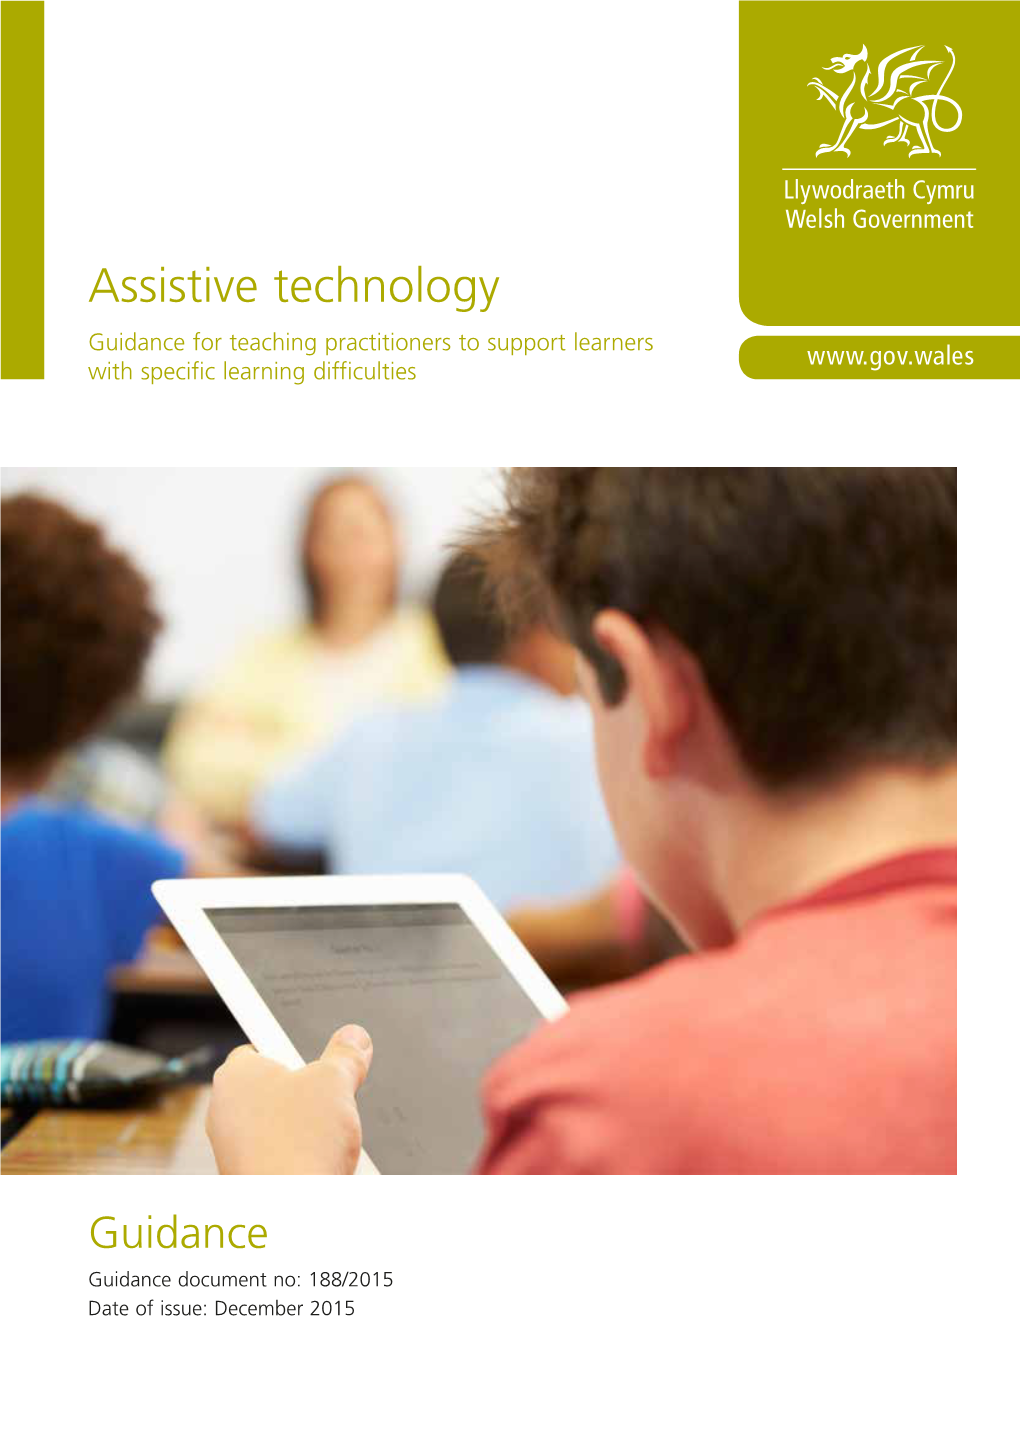 Assistive Technology Guidance for Teaching Practitioners to Support Learners with Specific Learning Difficulties